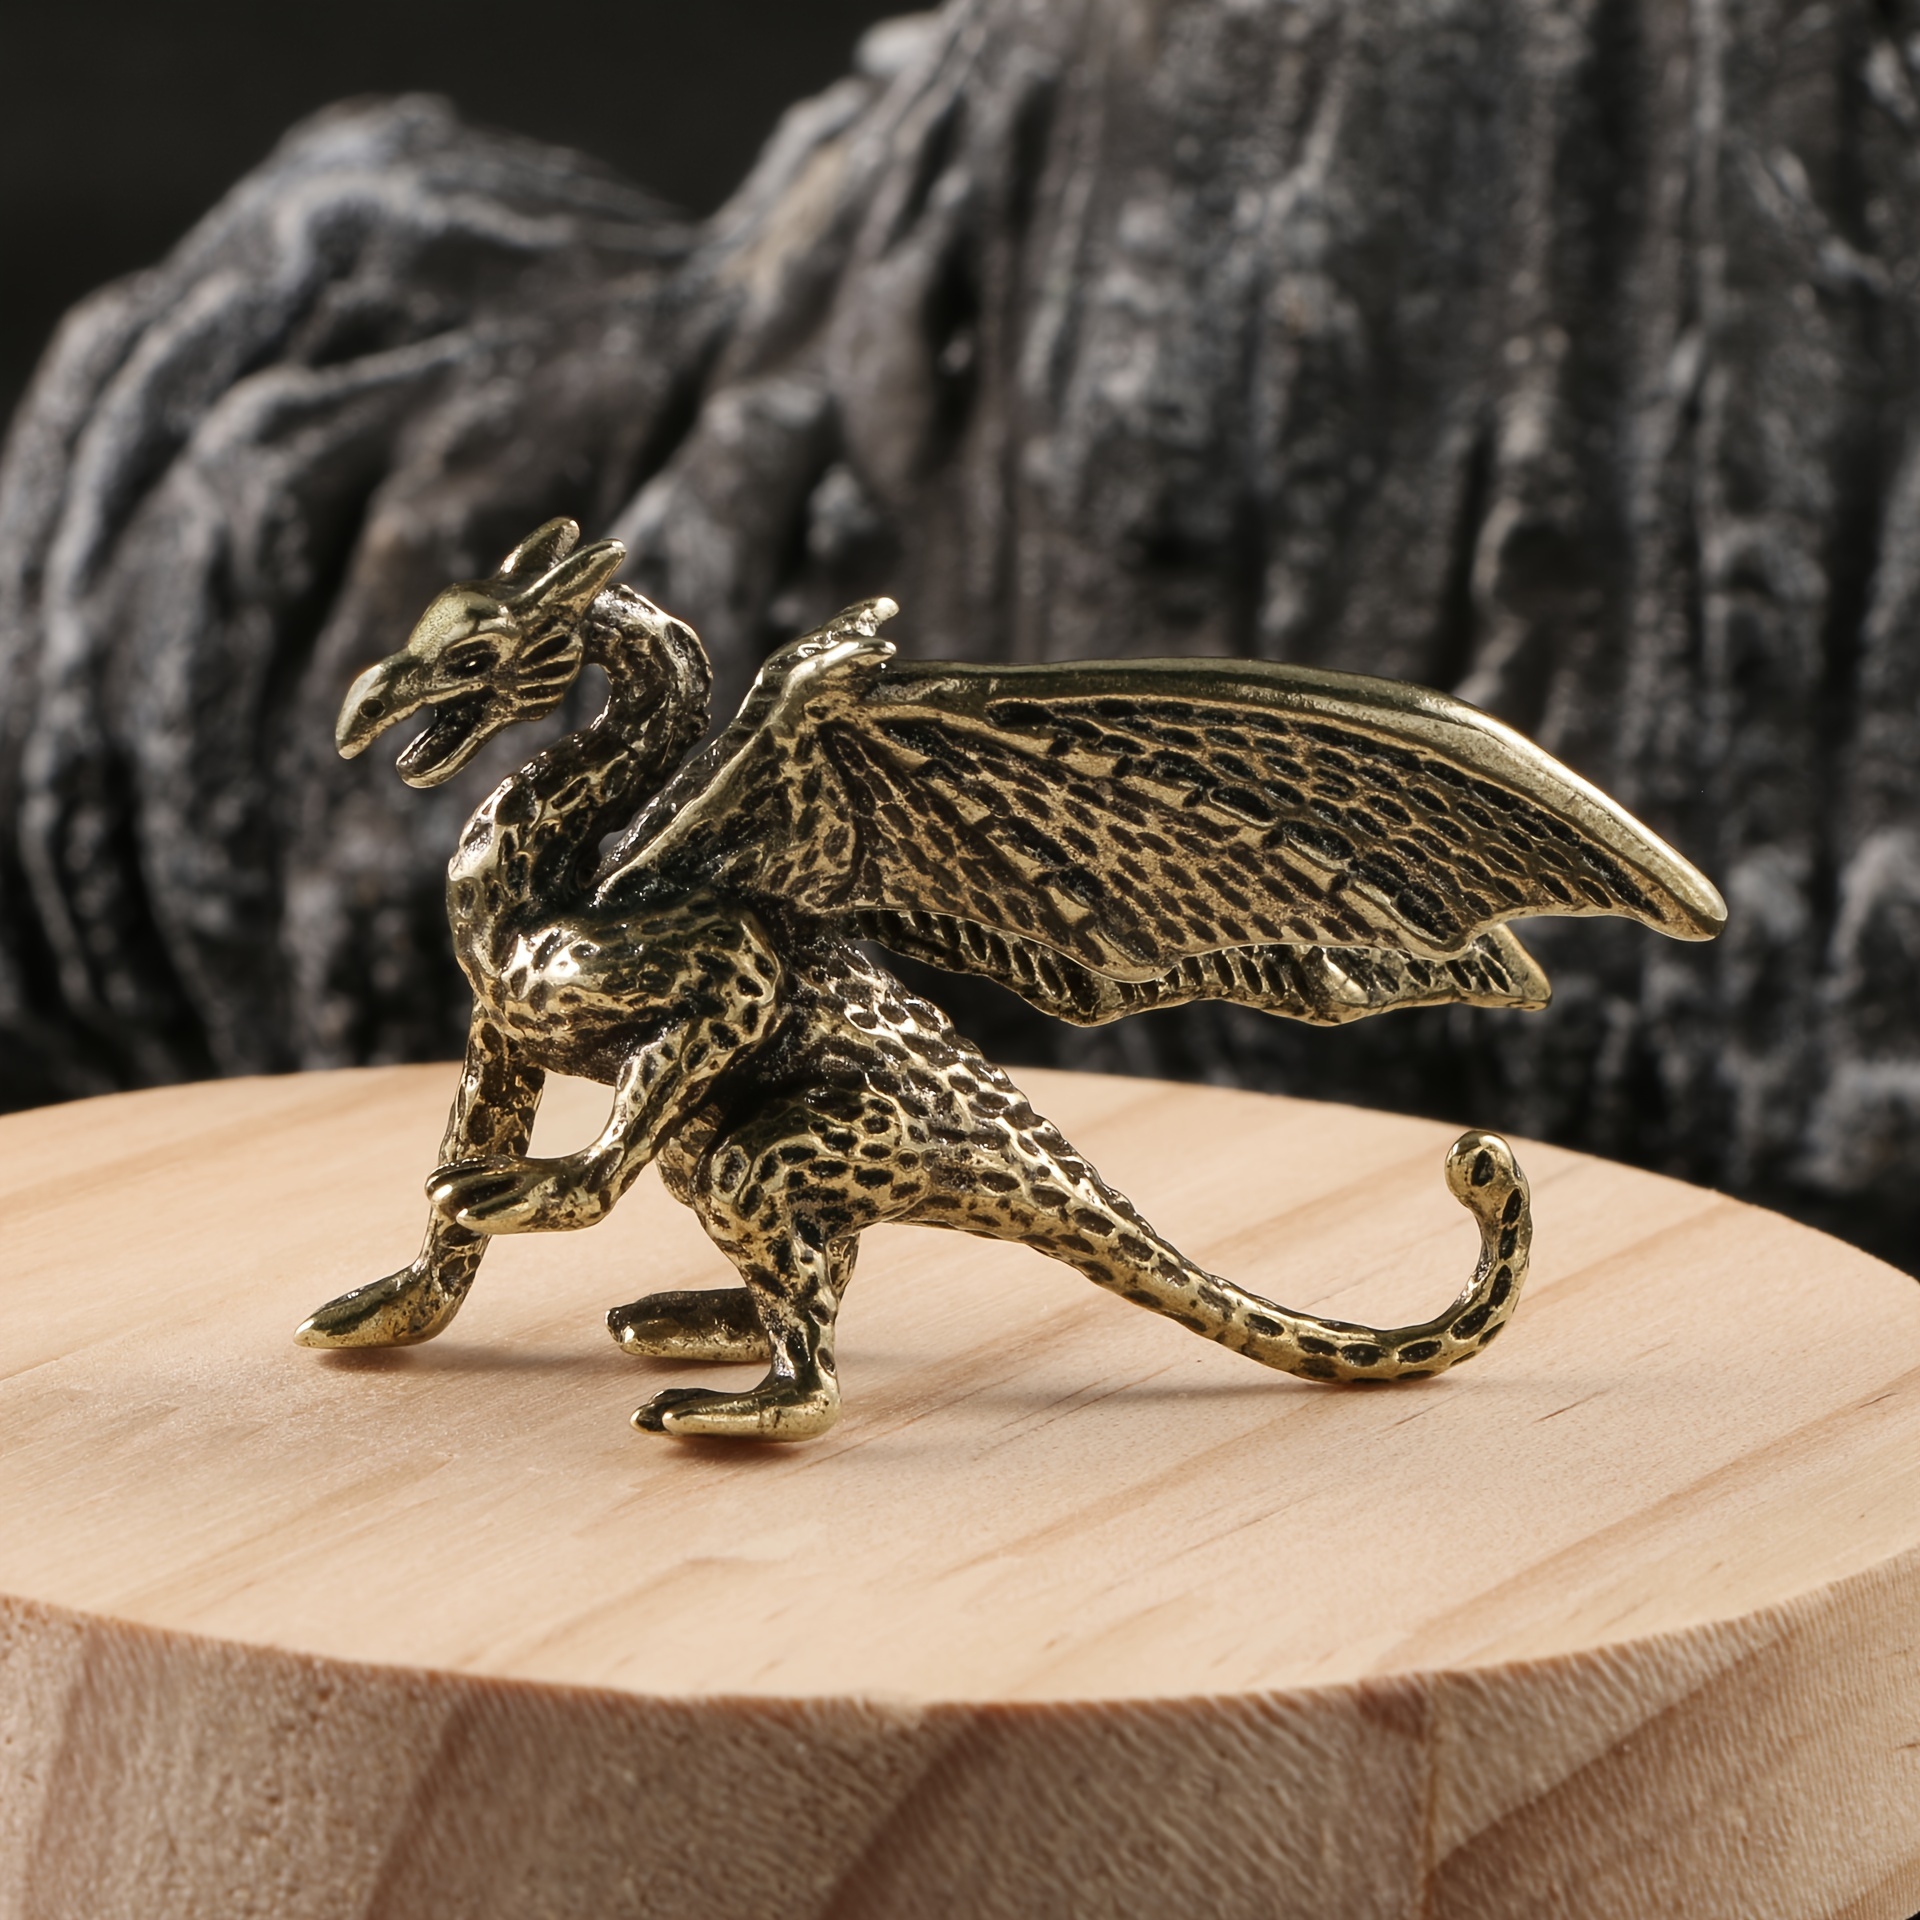 

Vintage Brass Dragon Figurine With Wings - Elegant Desktop Ornament For Home & Office Decor, Perfect Gift For Friends